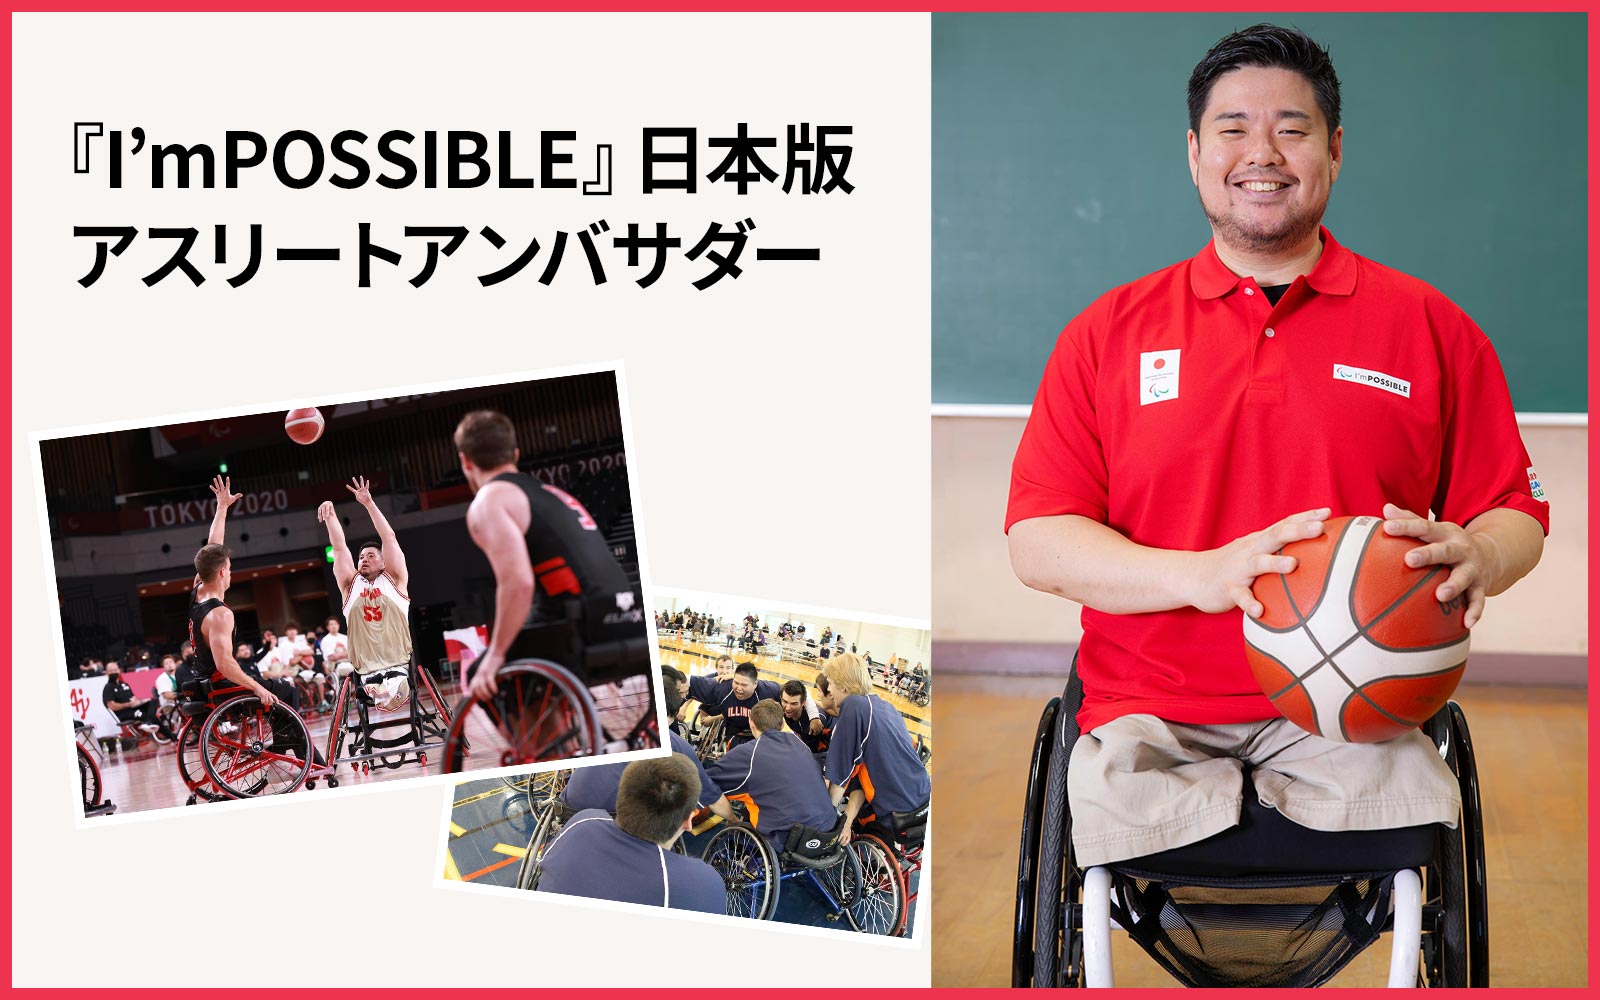 『I’mPOSSIBLE』 日本版 アンバサダー